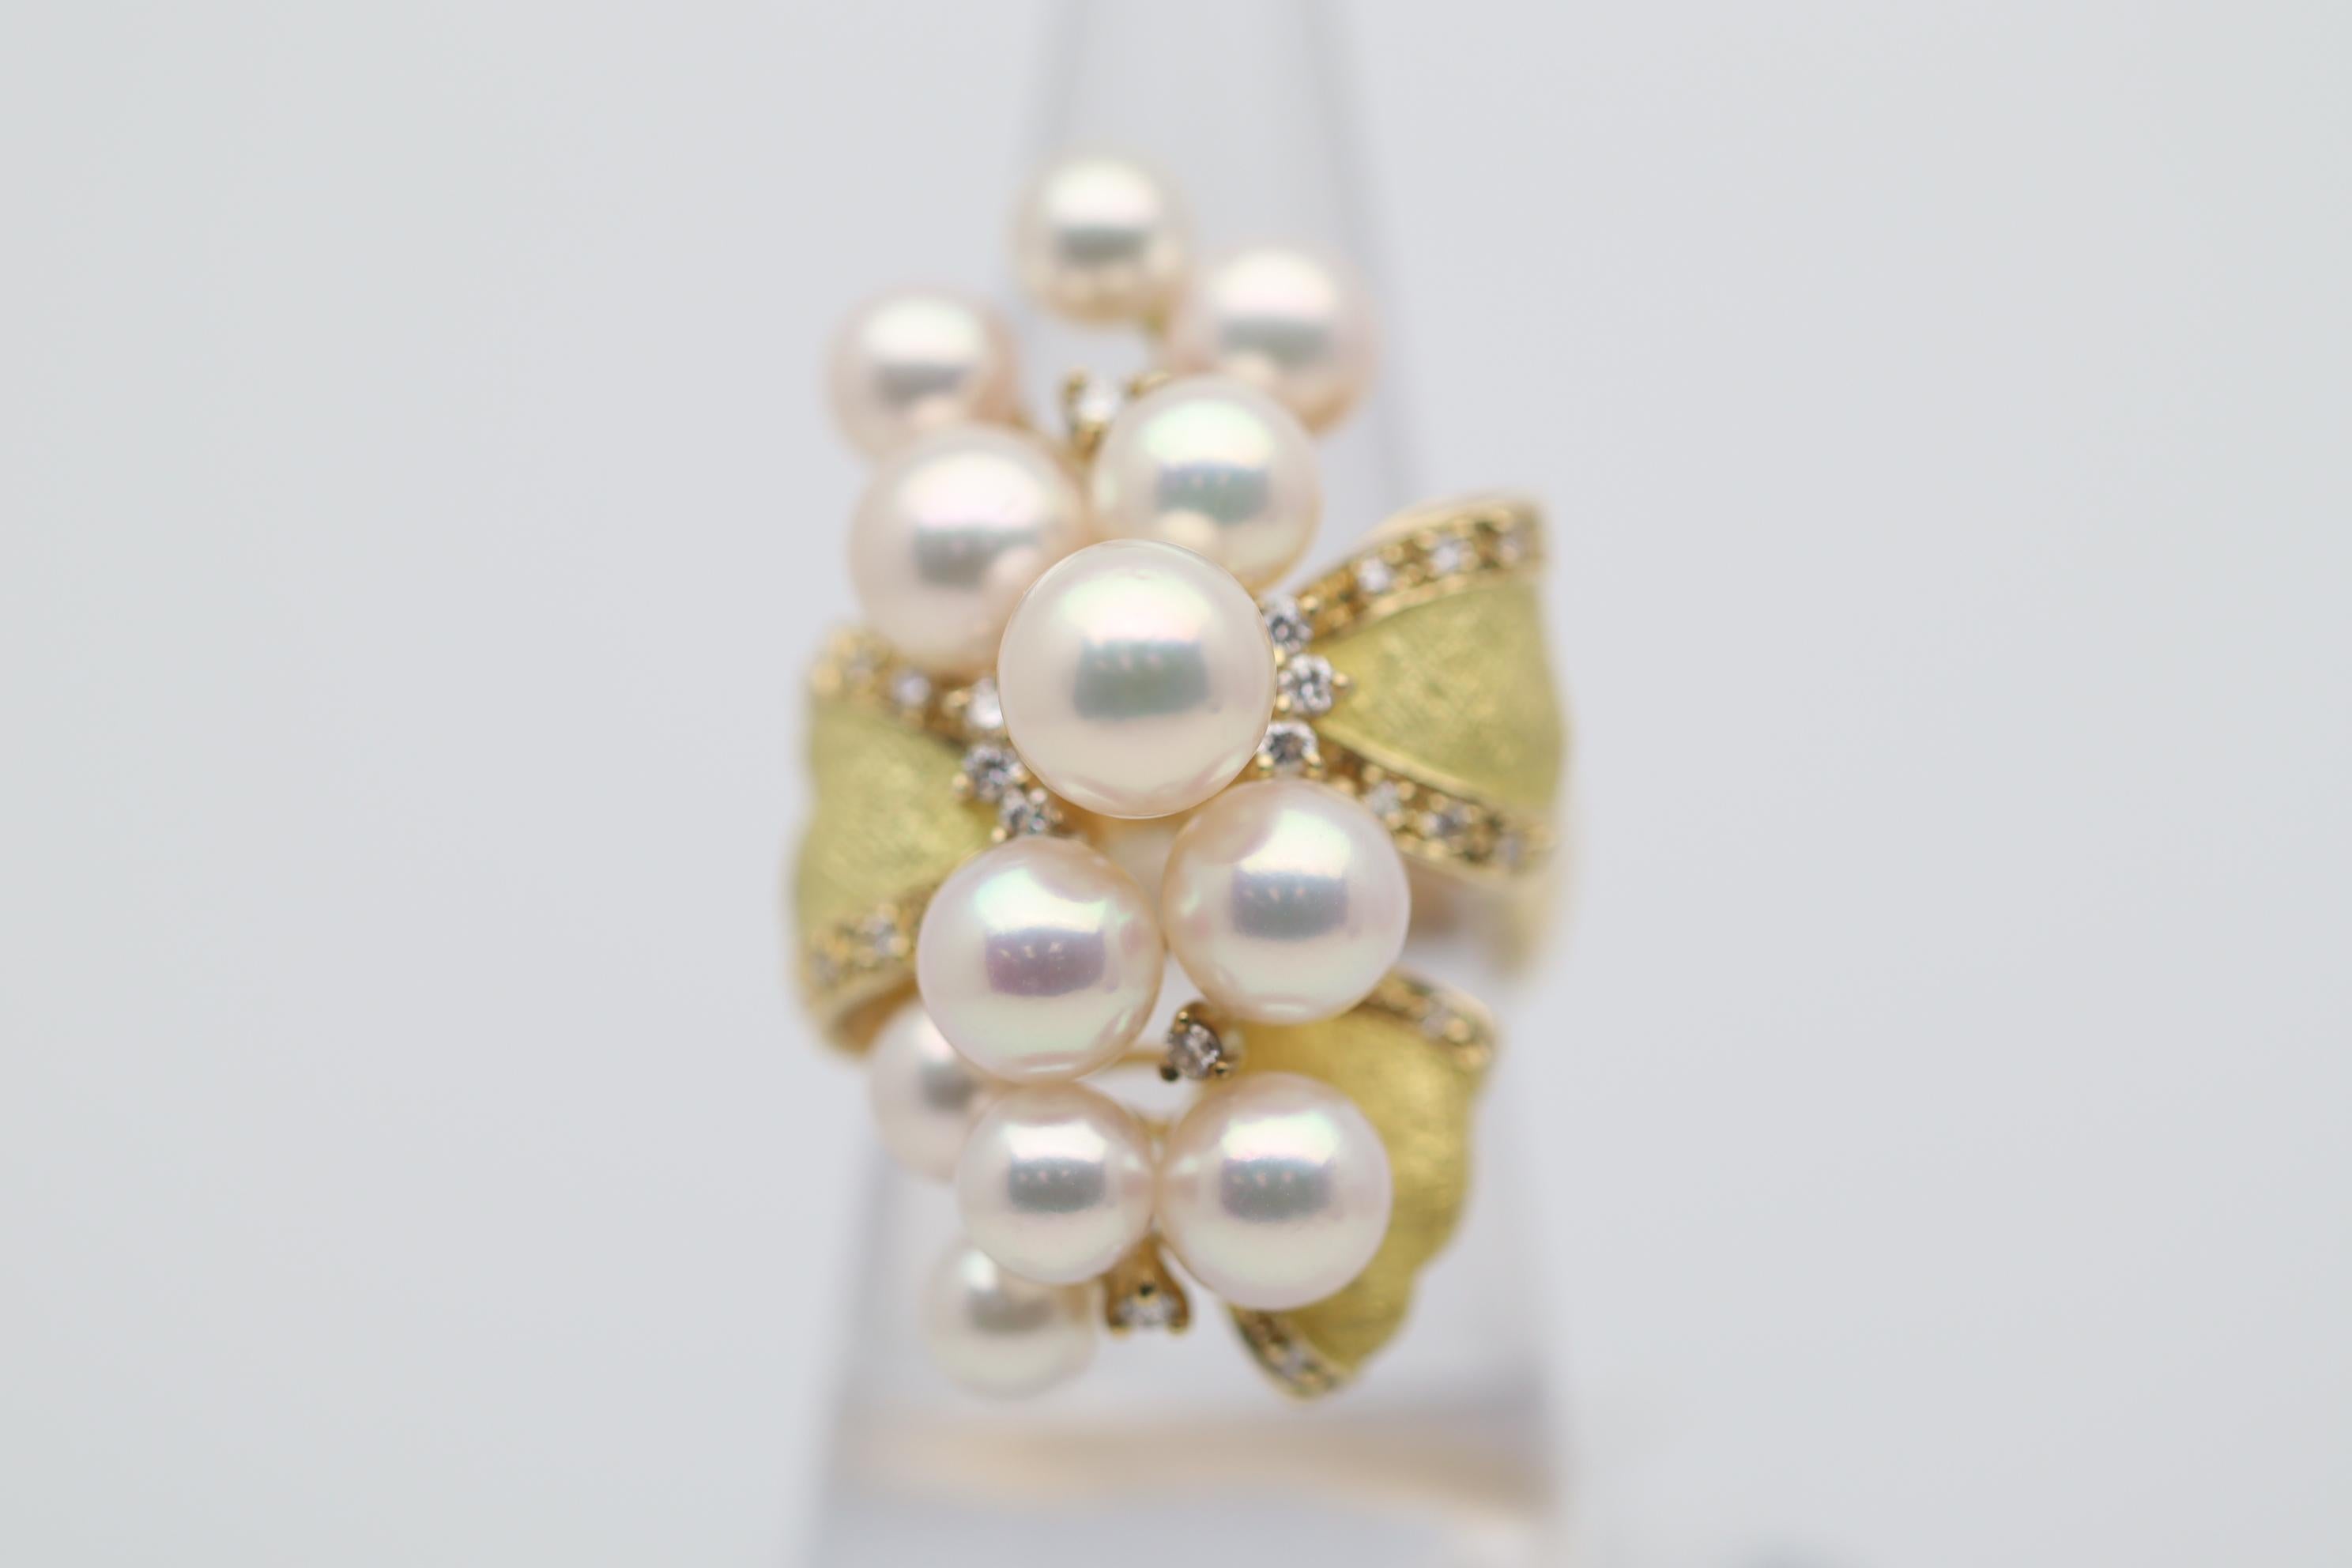 A large 18k gold cocktail ring studded with diamonds and a cluster of twelve AAA-Quality Akoya pearls. The pearls measure 5 - 8 millimeters in diameter and are all perfectly round with amazing luster and a strong pink/rose overtone that make the